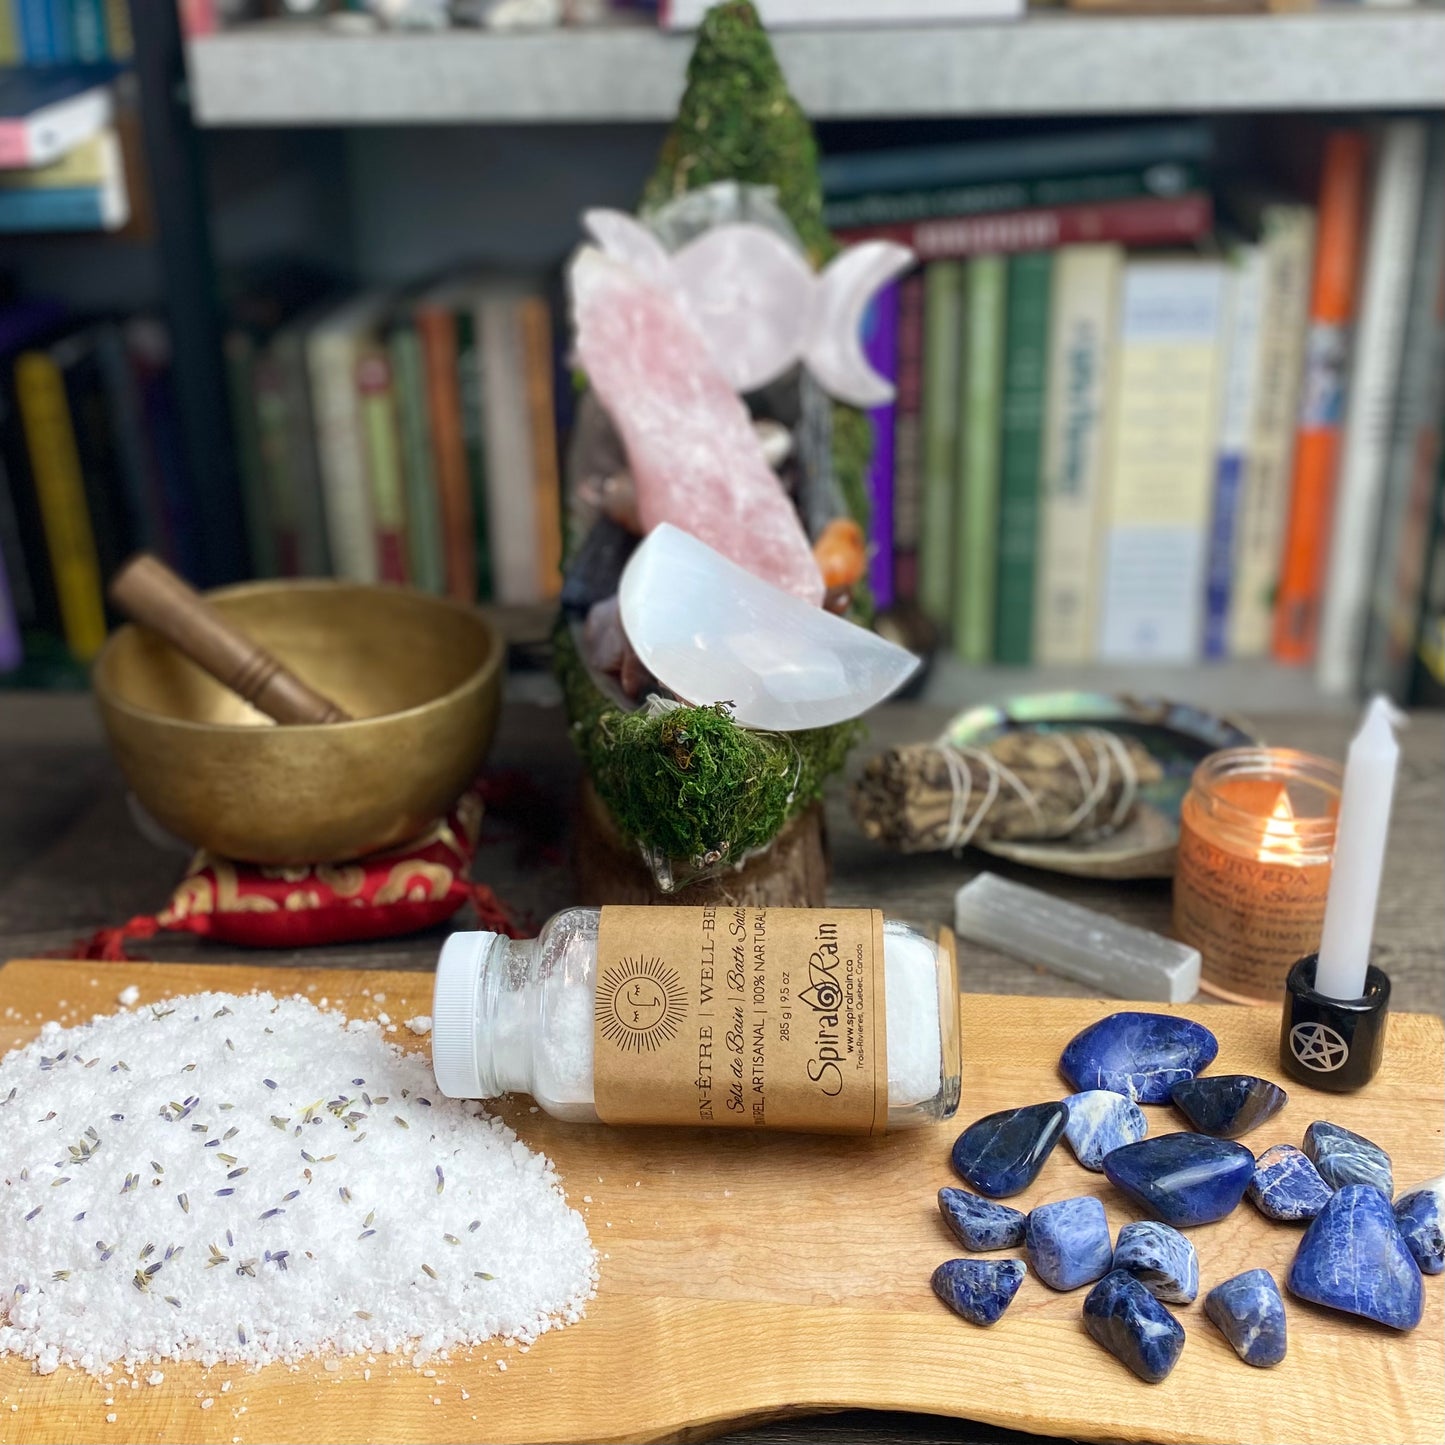 Well-Being bath salts at $20 only from Spiral Rain